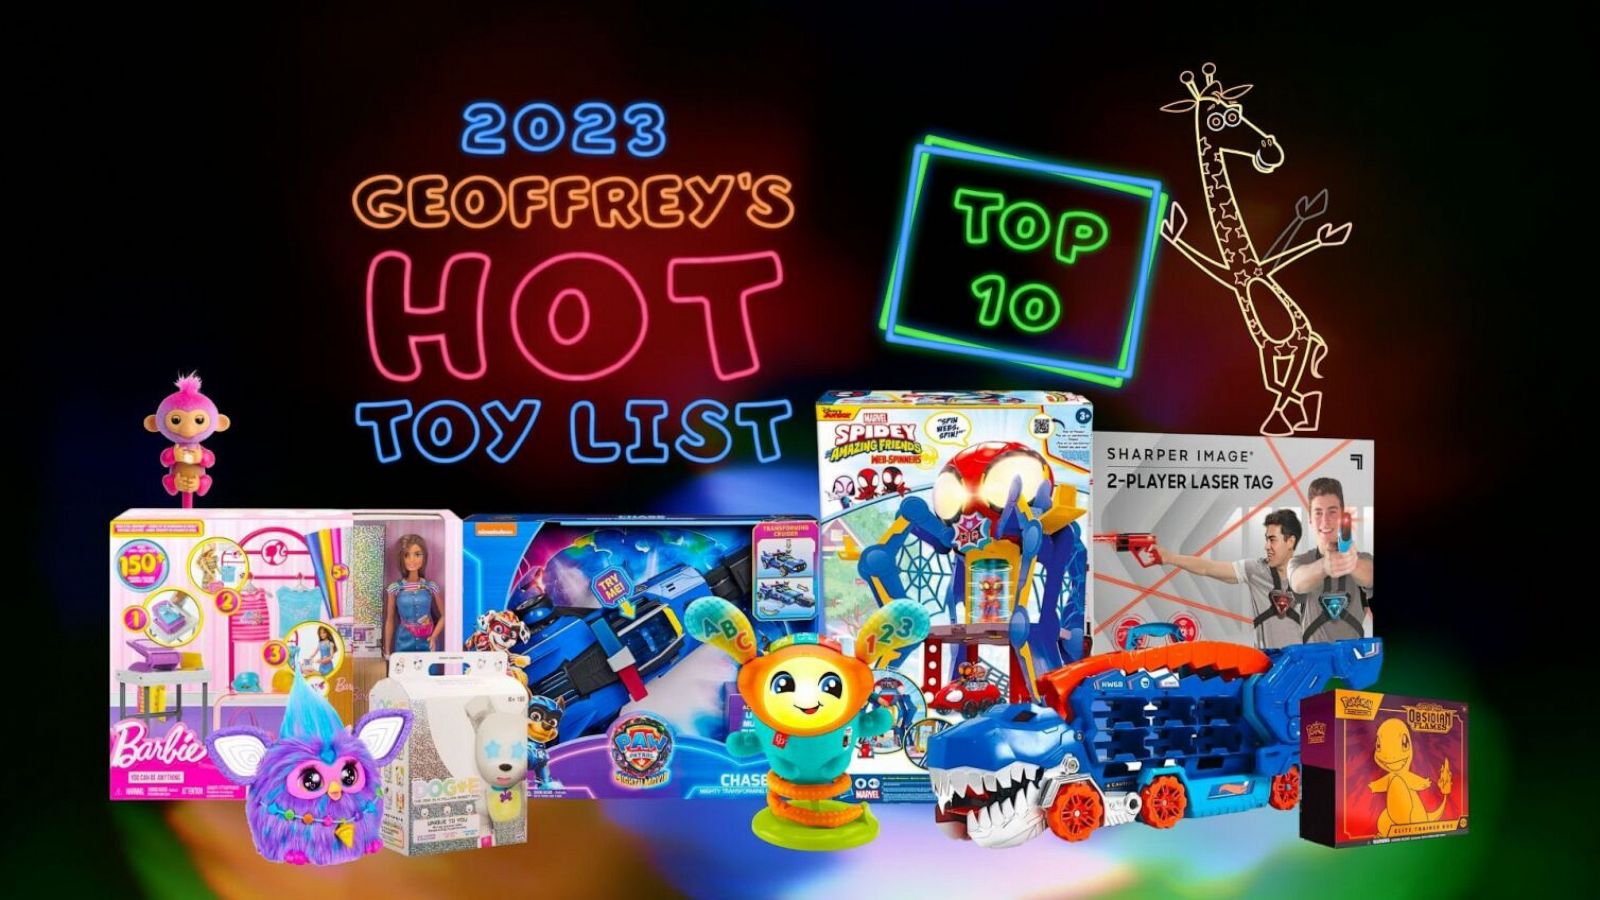 Macy's and Toys 'R' Us announce hot toy list for 2023 - Good